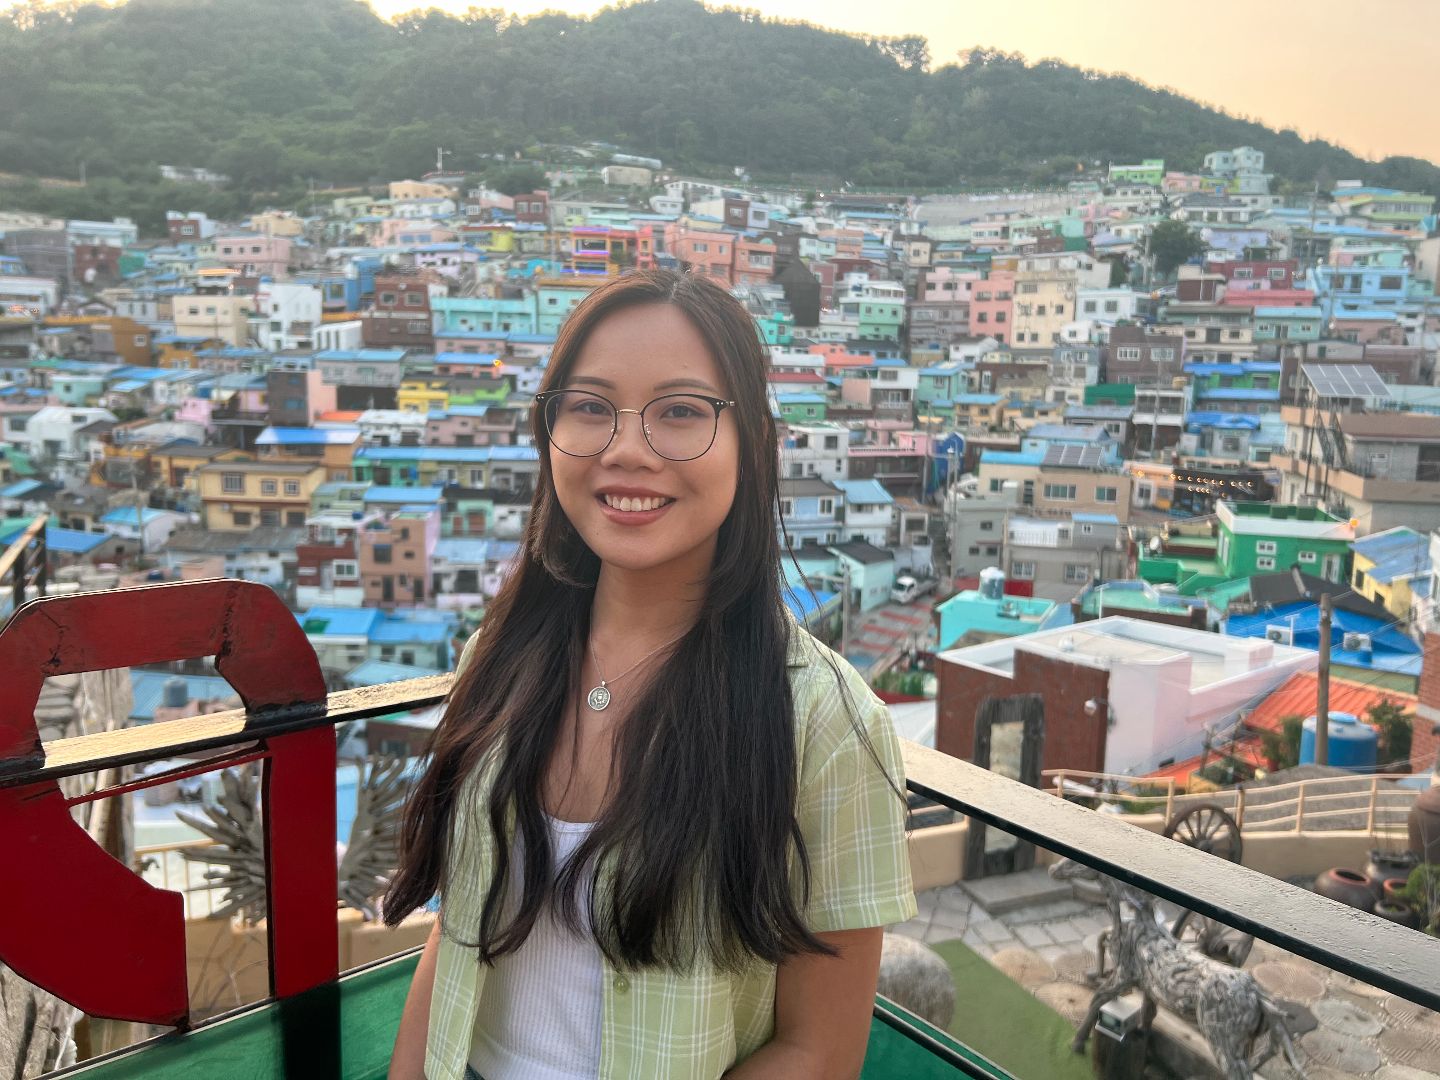 Sydney standing in front of a colorful village in S Korea